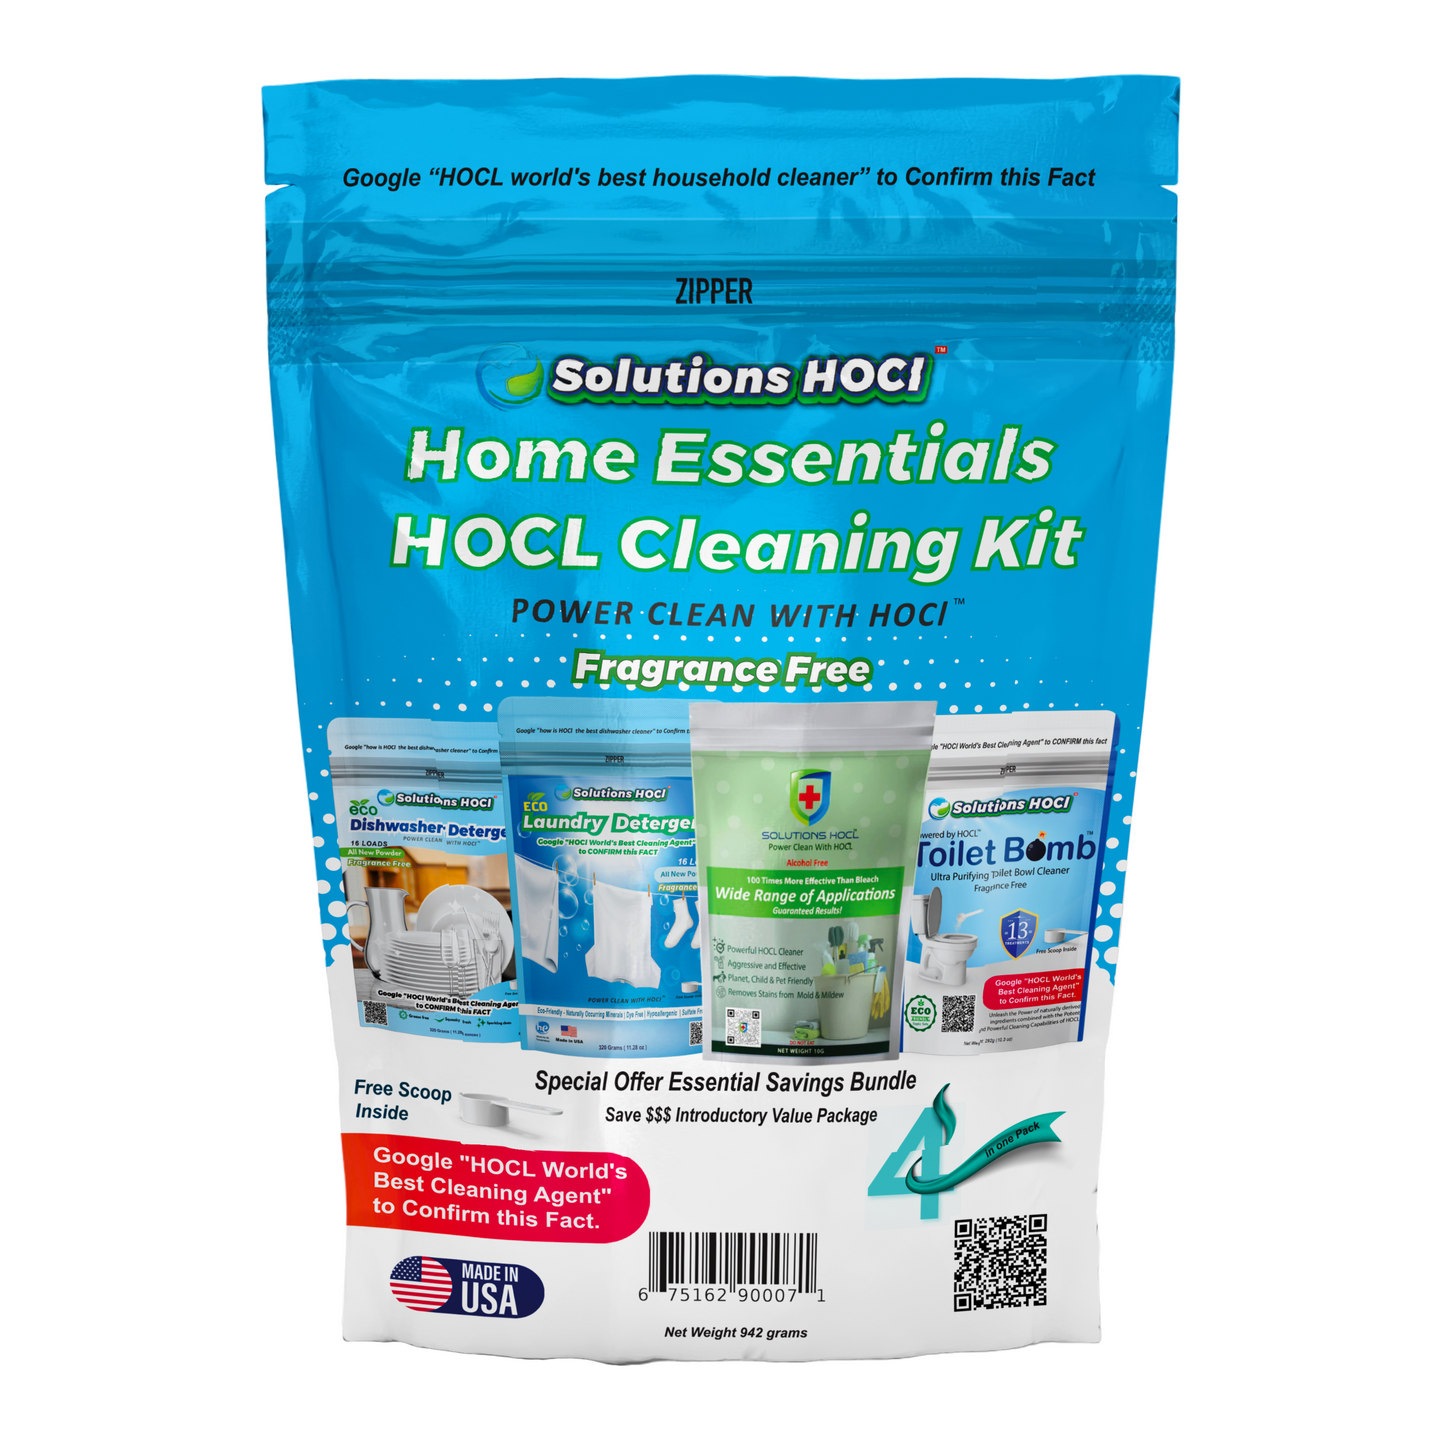 Home Essentials HOCL Cleaning Kit Fragrance-Free